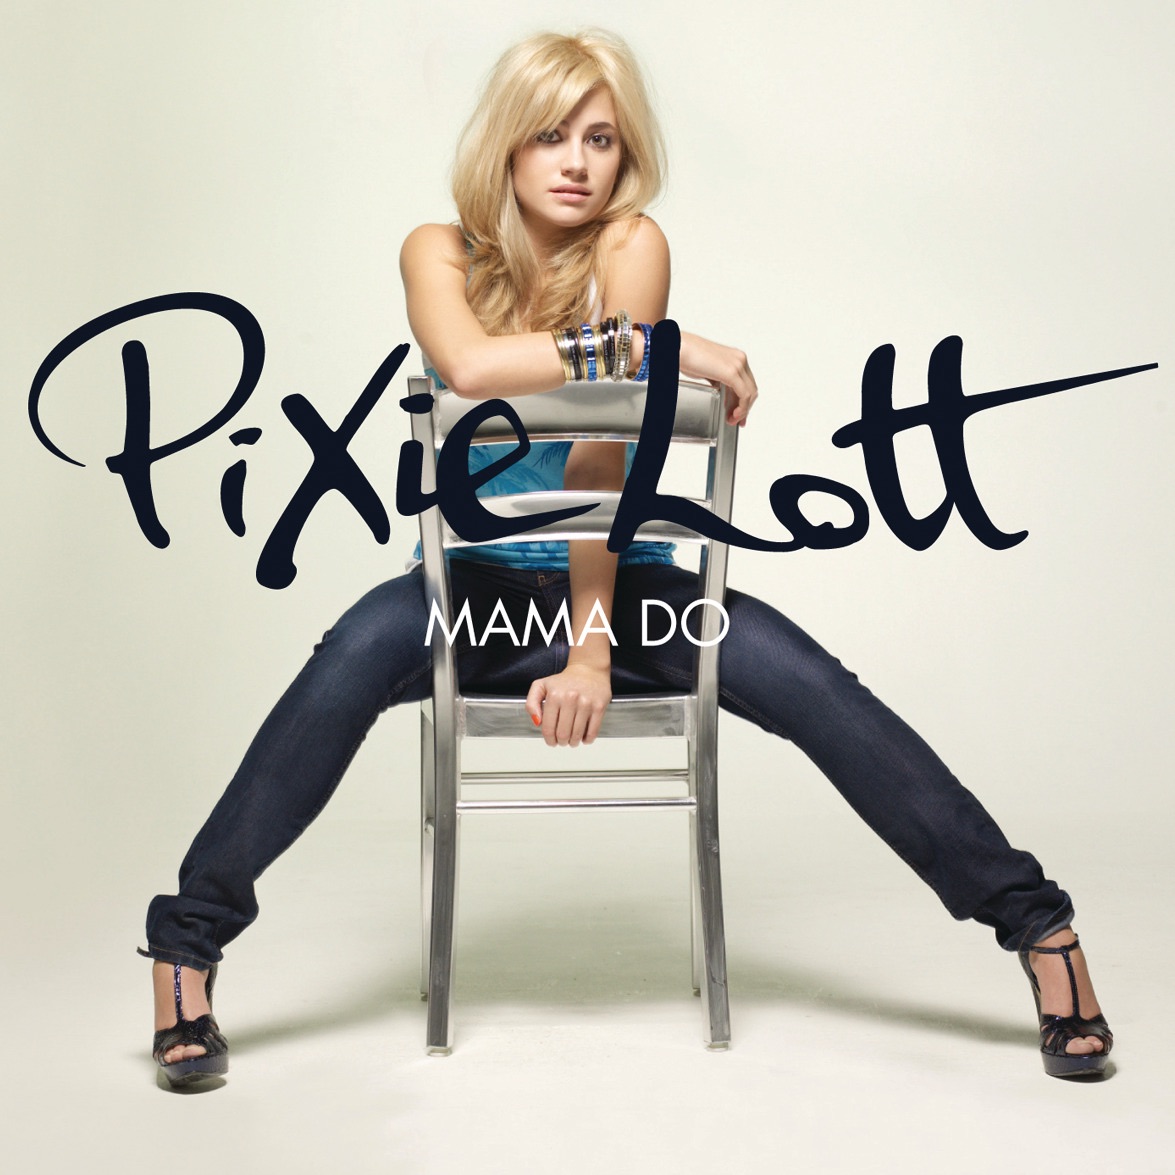 Pixie Lott — Mama Do (Uh Oh, Uh Oh) cover artwork